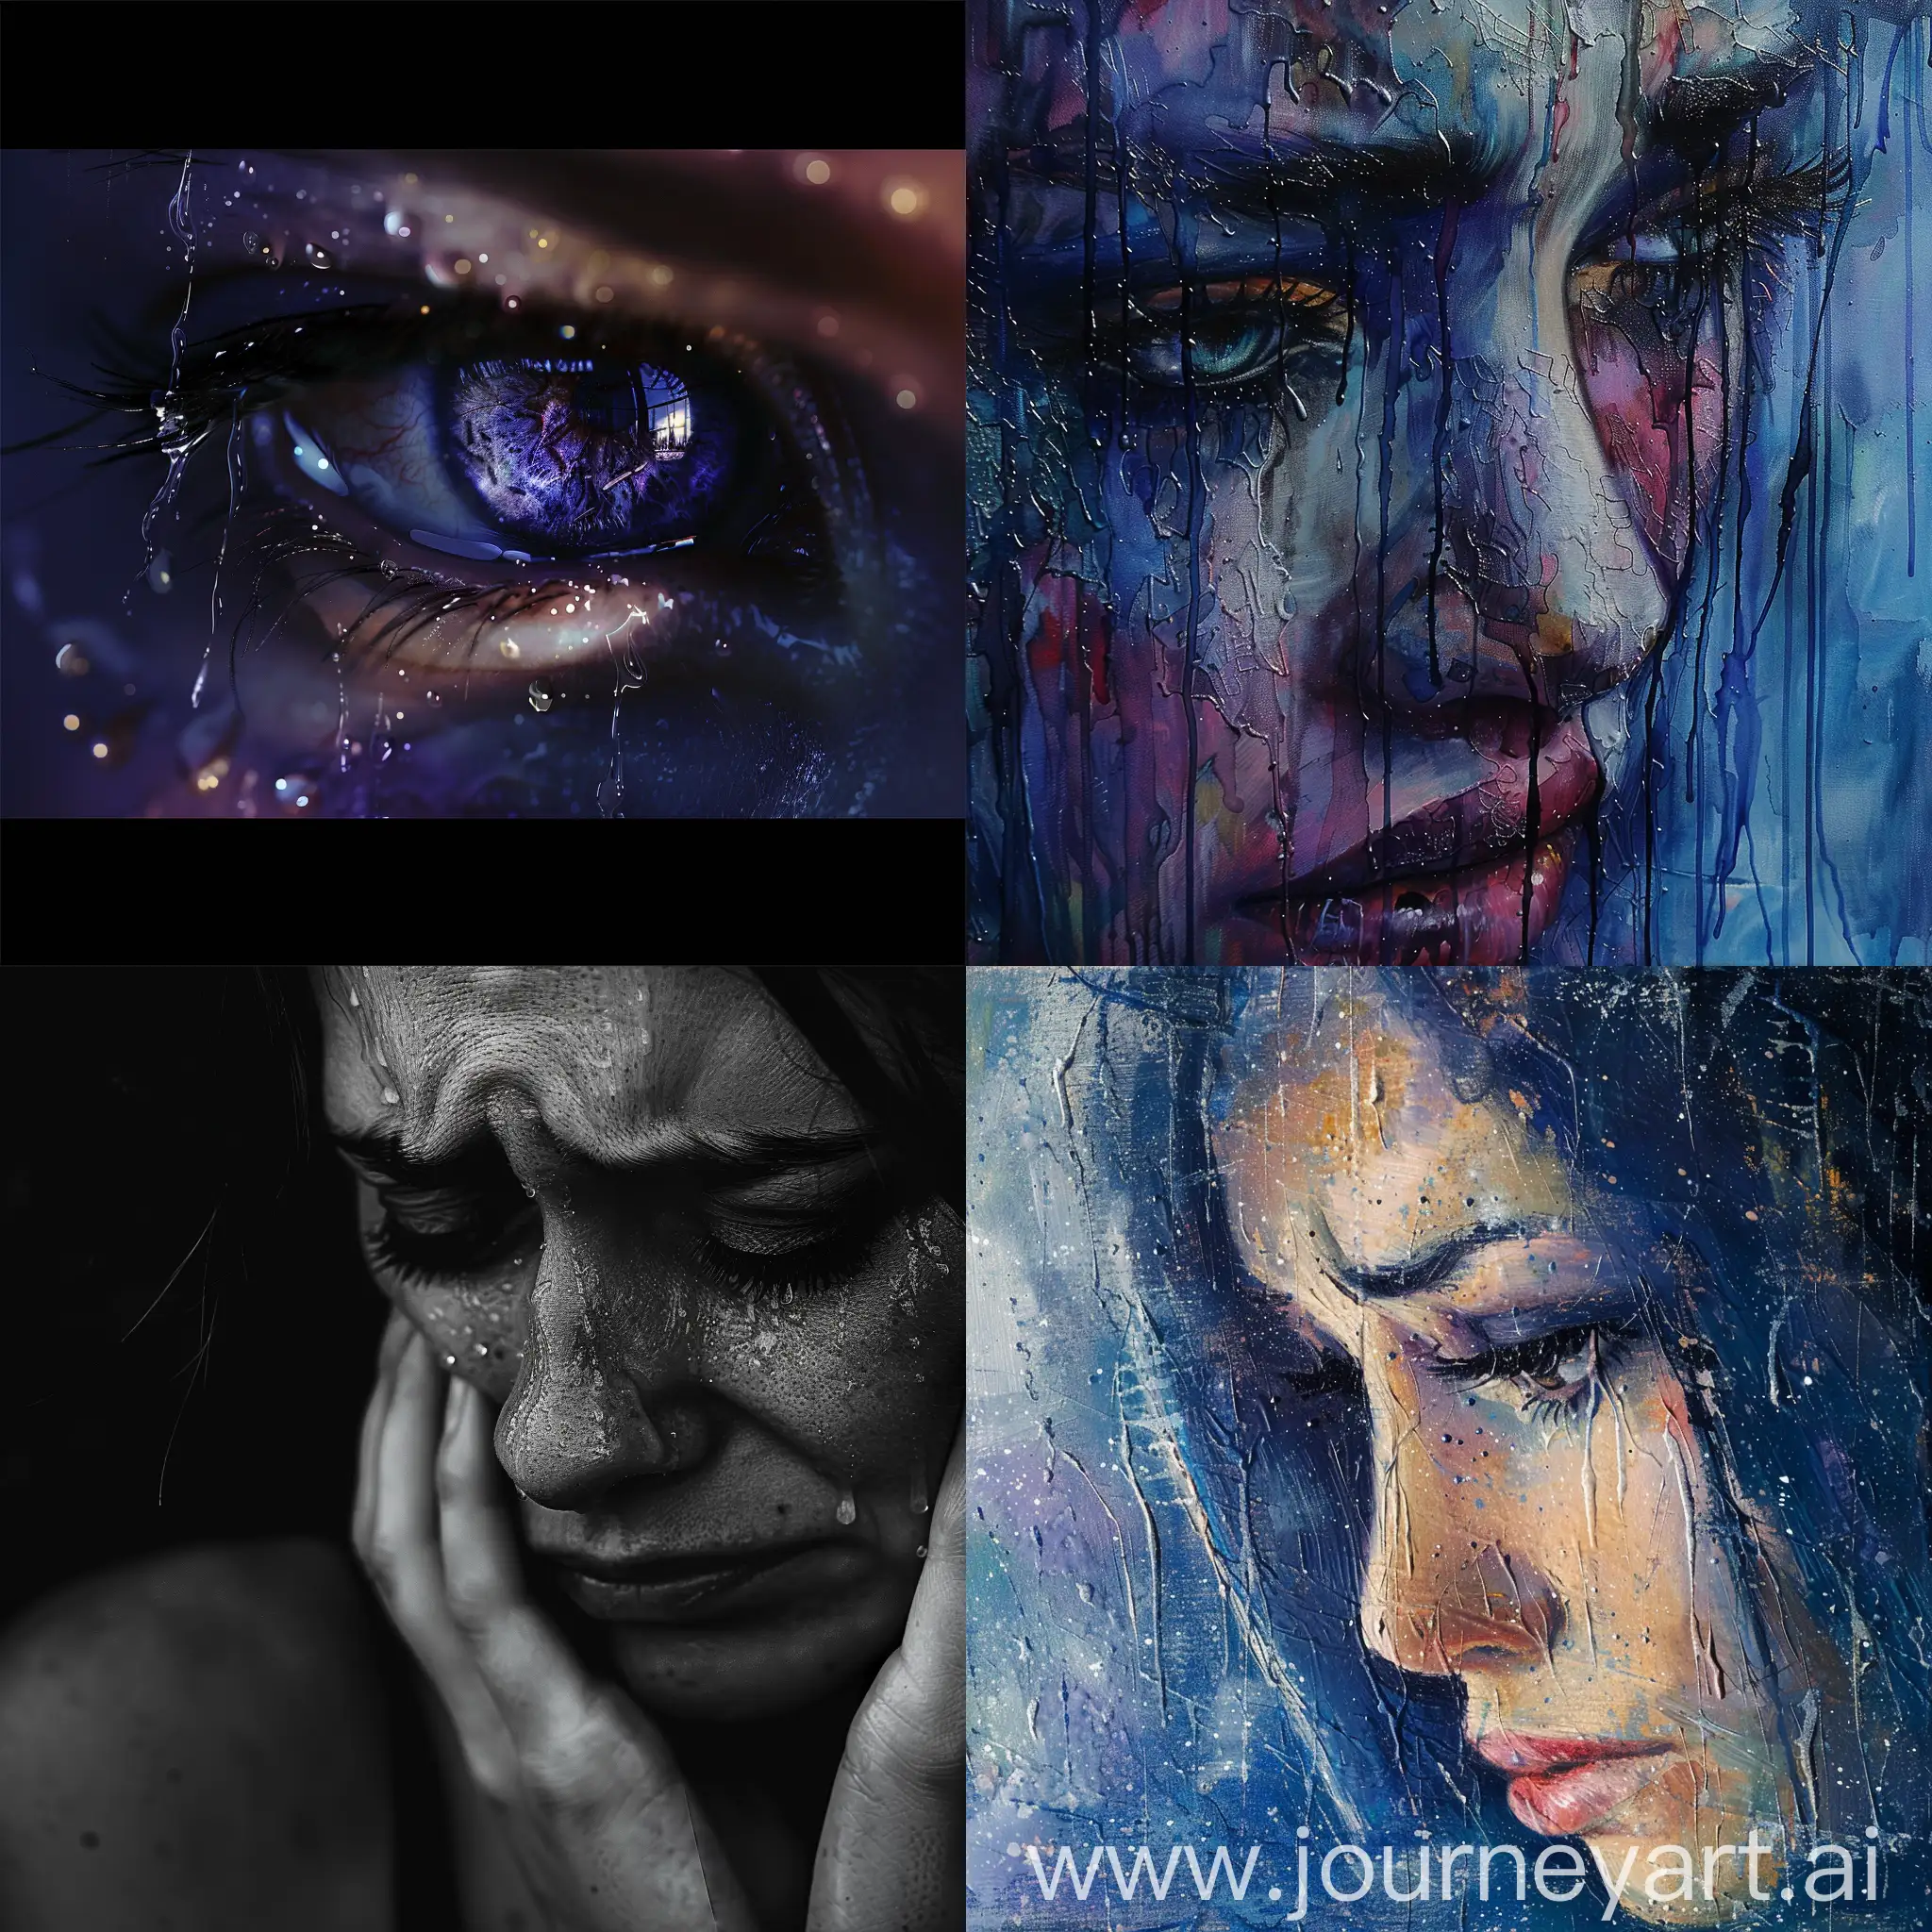 Create an image for the following quote: Remember, it's okay to cry; it's a way of letting out the pain.